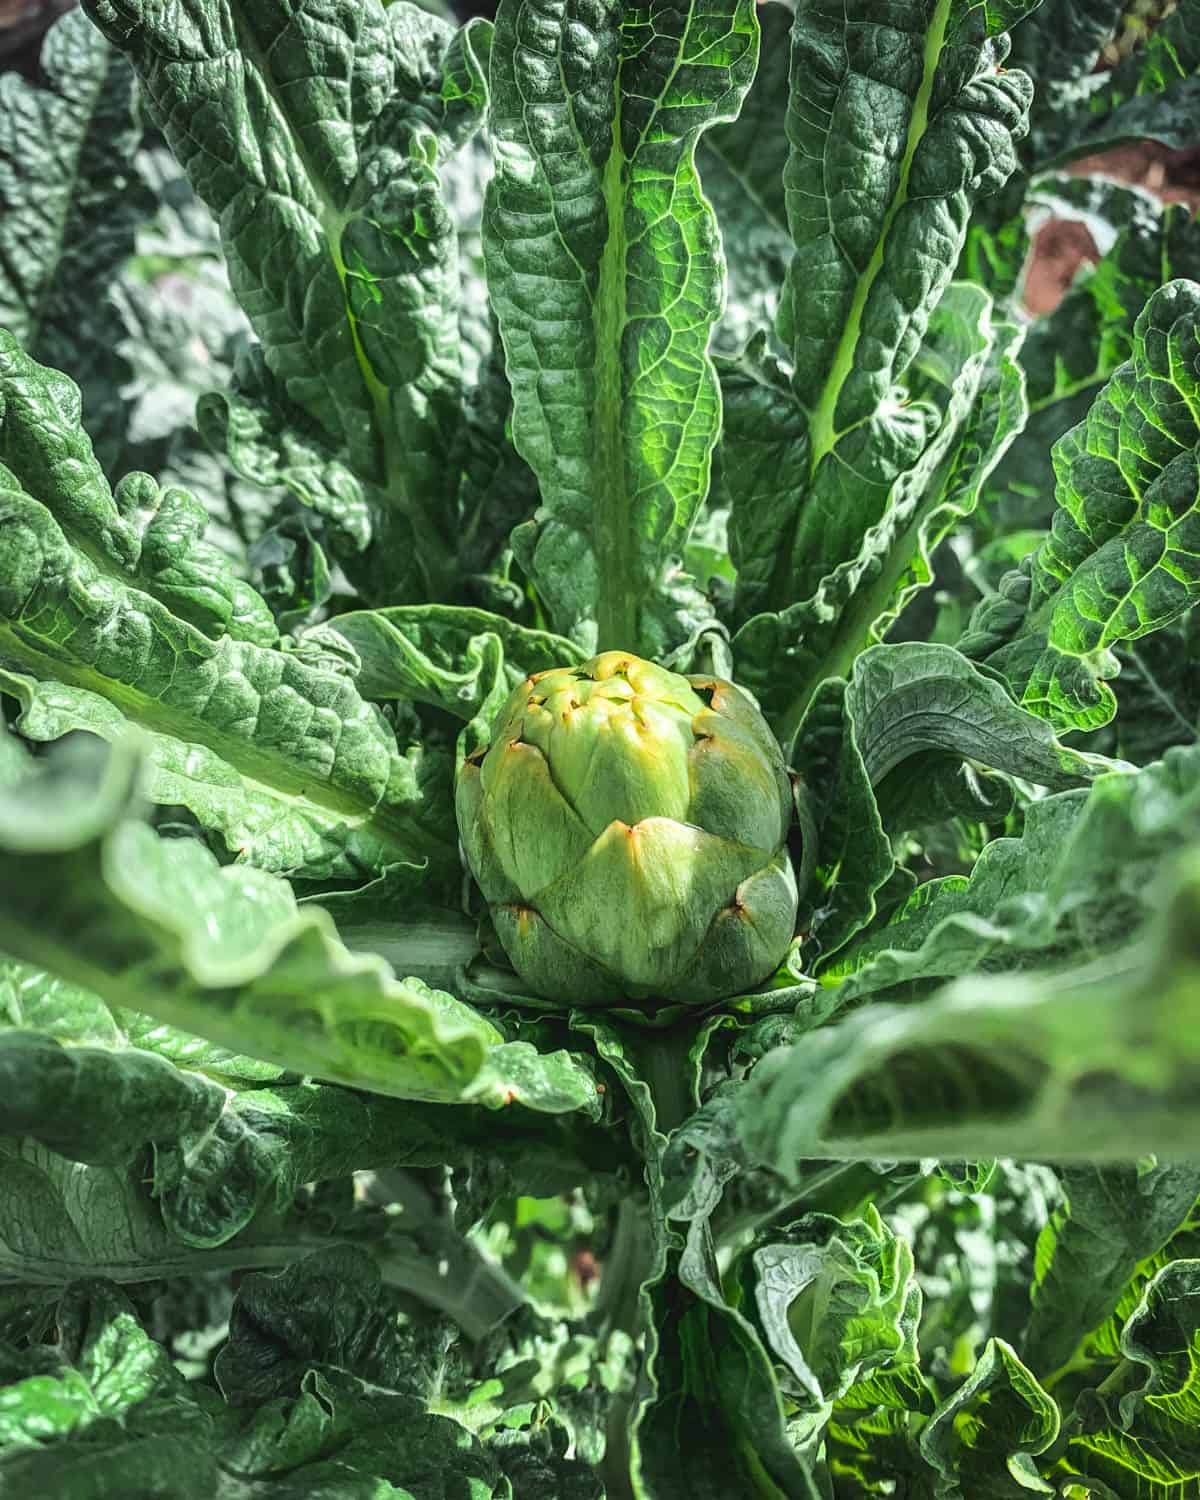 A small artichoke growing low on the stalk, with leaves surrounding it. 